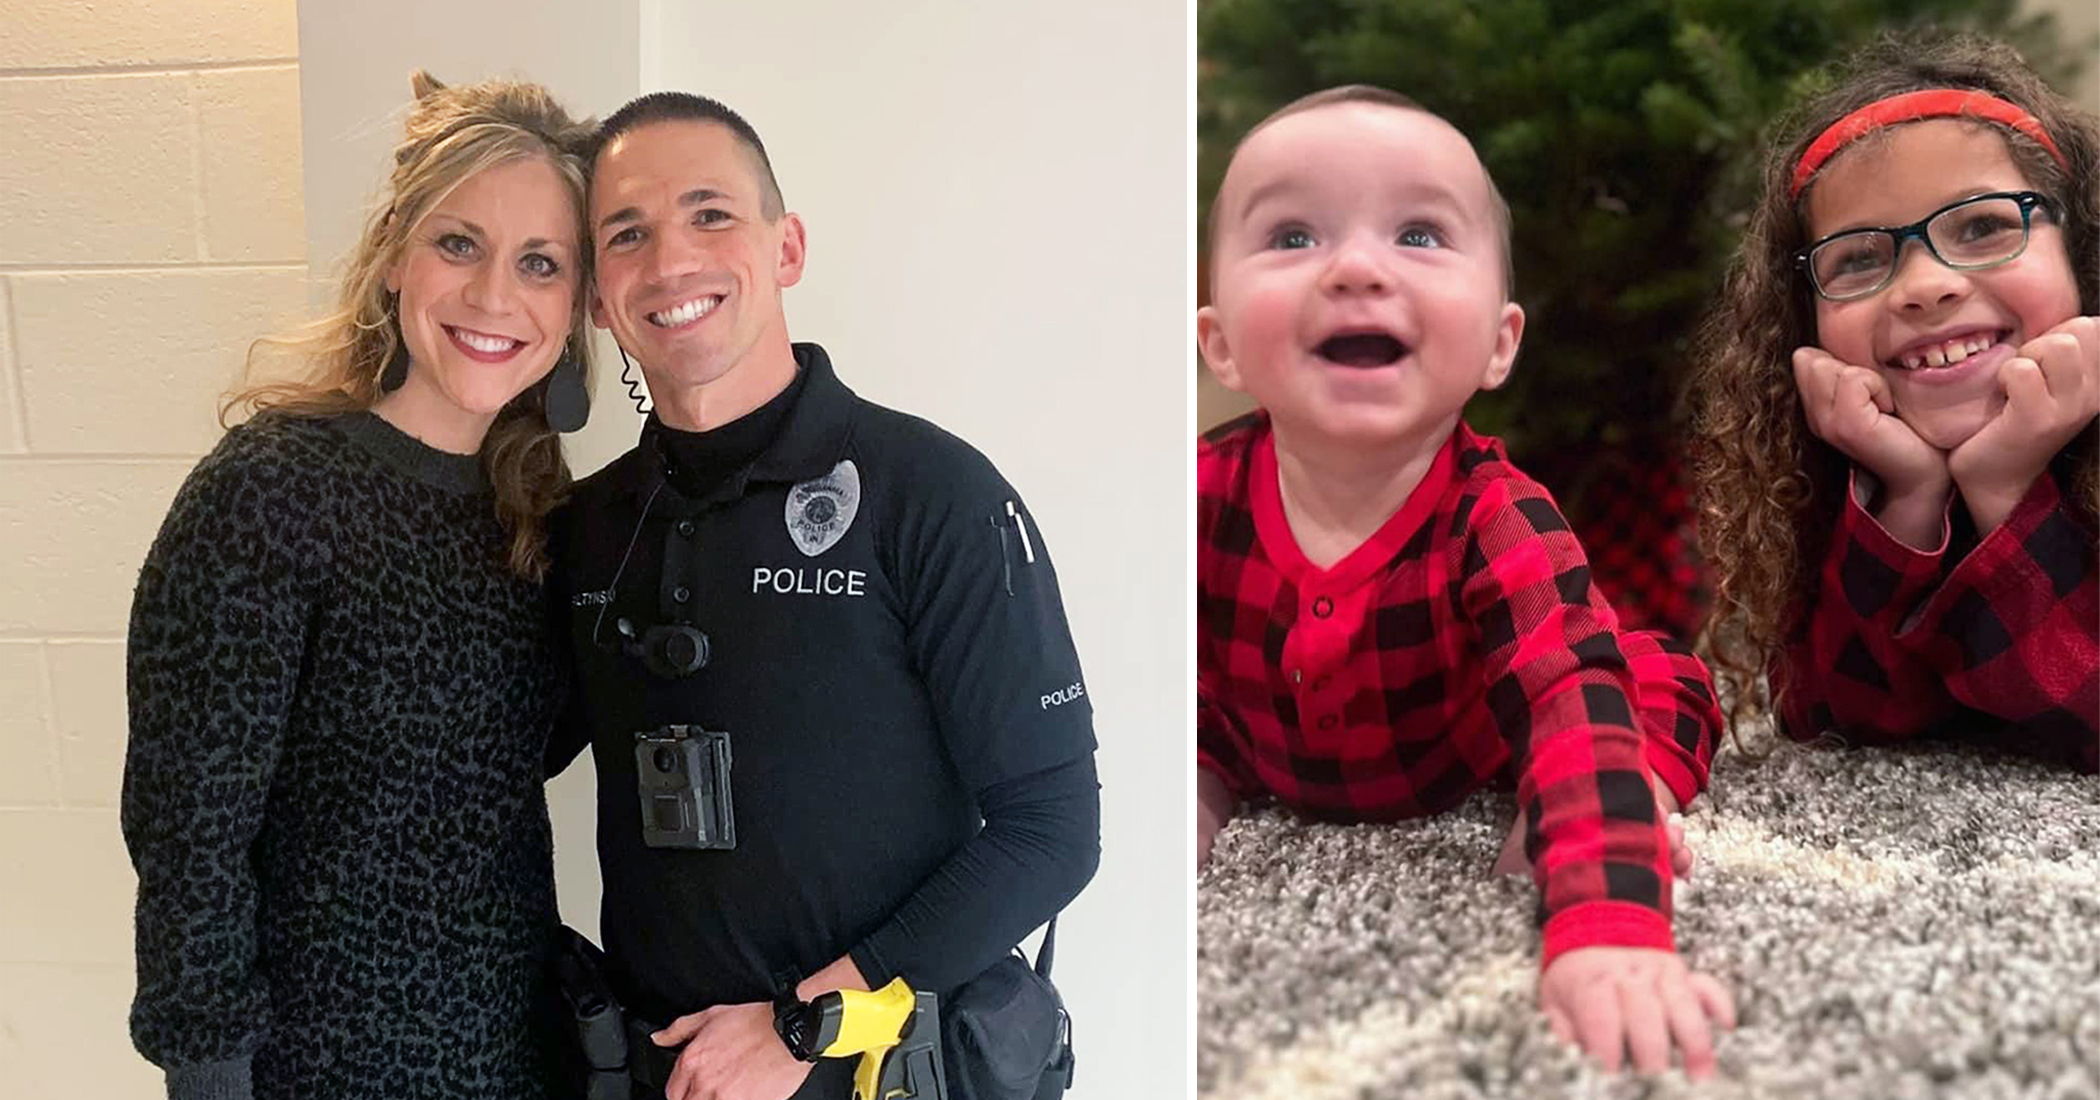 NextImg:Police officer and his wife adopt abandonded newborn just months after adopting their first daughter